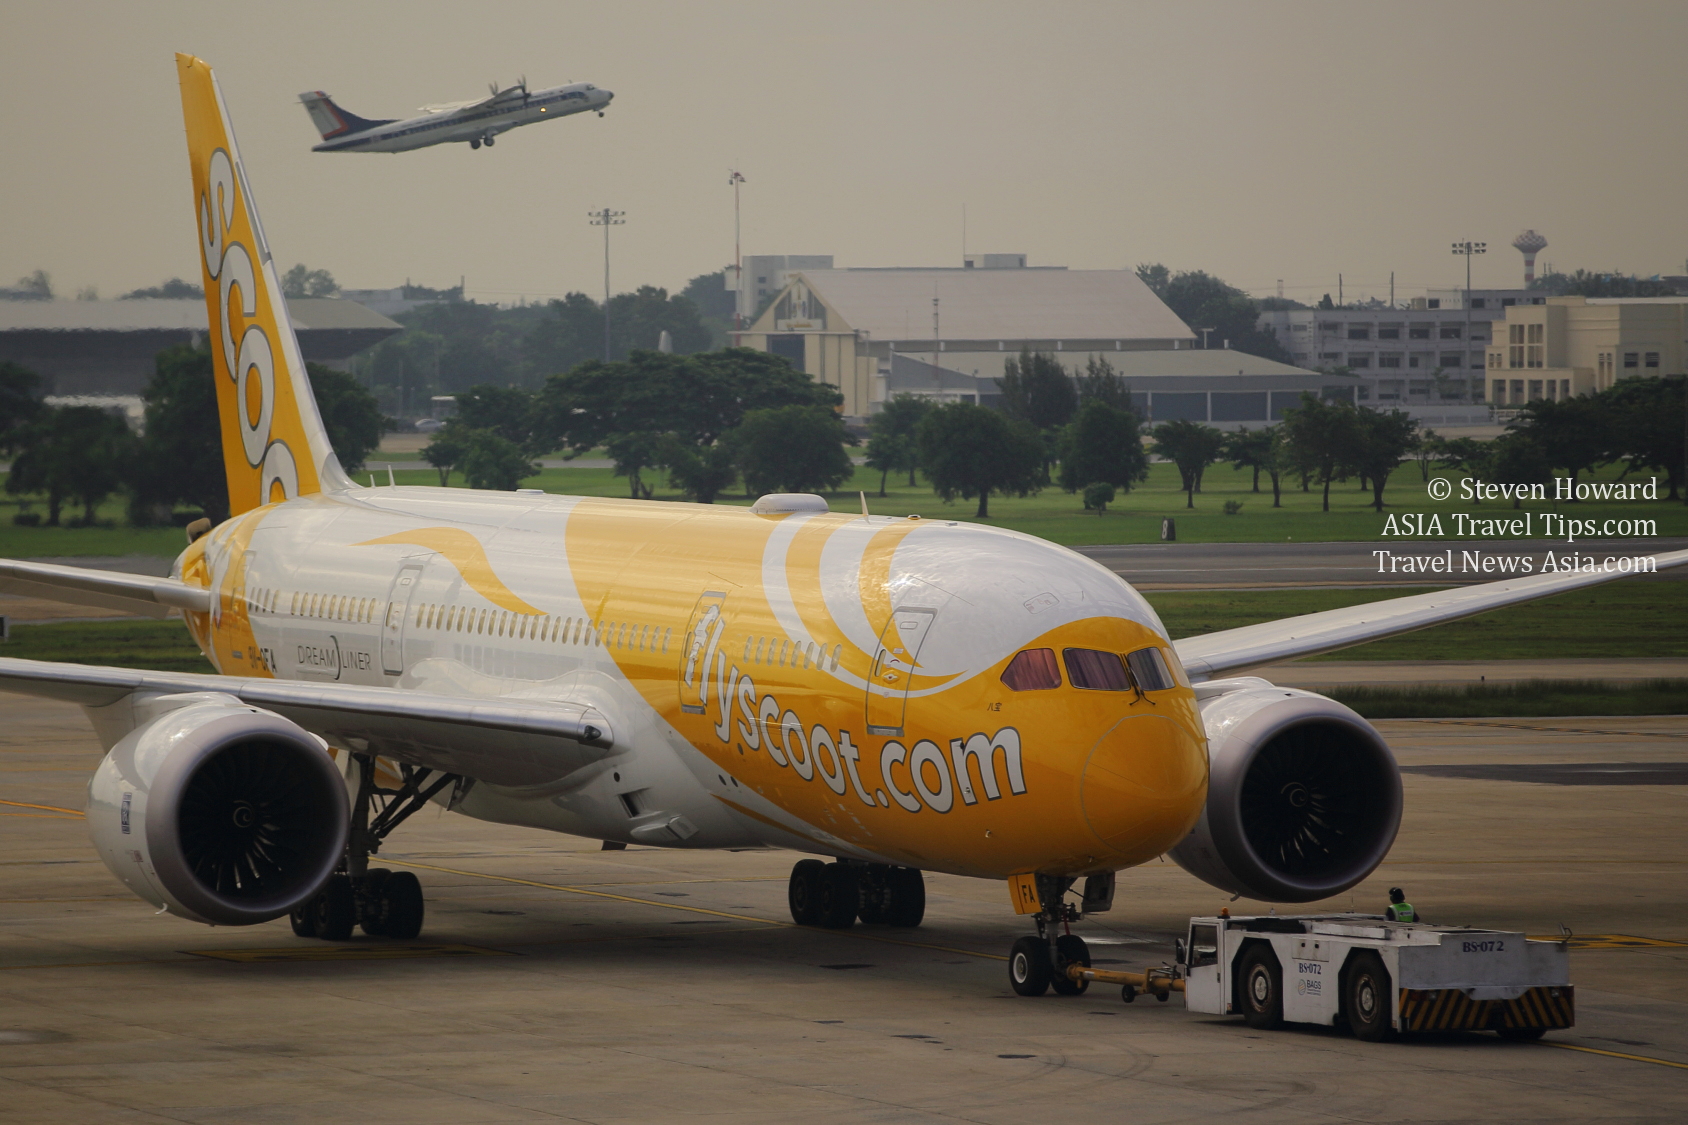 Scoot Boeing 787 Dreamliner. Picture by Steven Howard of TravelNewsAsia.com Click to enlarge.